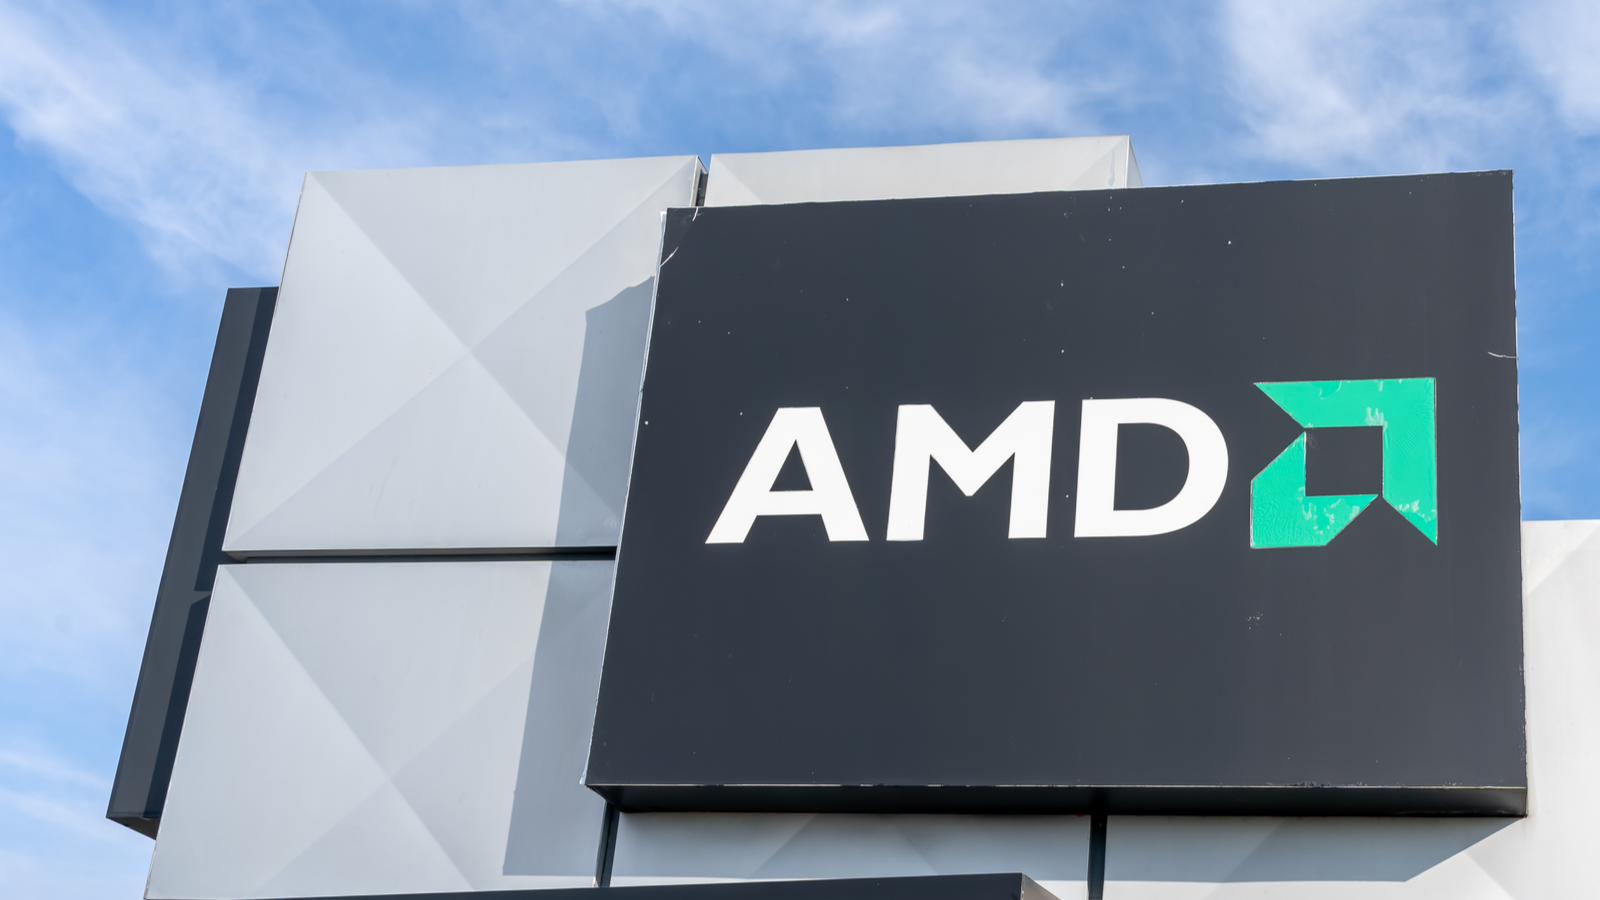 Close up of AMD sign in Markham, Ontario, Canada. Advanced Micro Devices, Inc. (AMD Stock) is an American multinational semiconductor company.